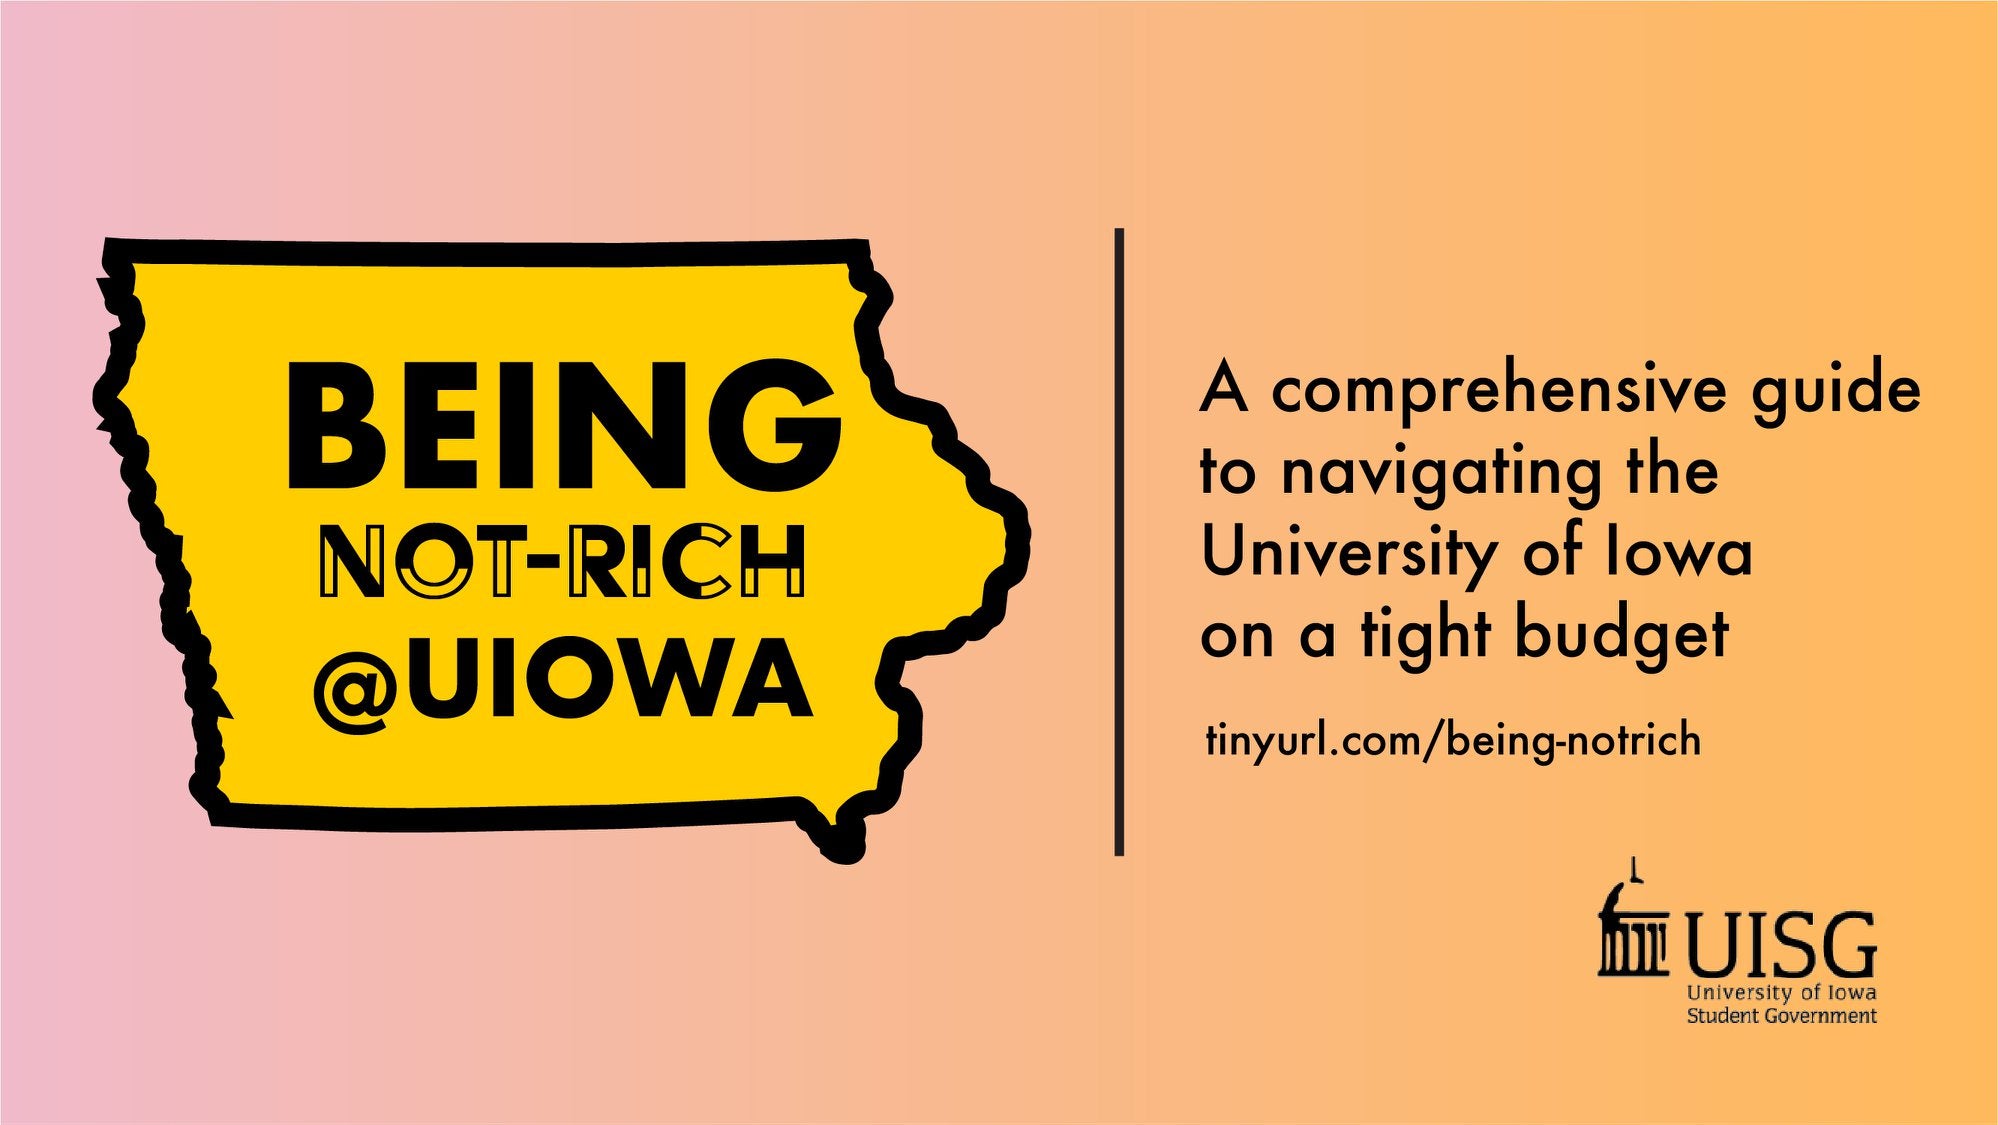 Contains the Being Not-Rich @Uiowa logo and the text "A comprehensive guide to navigating the University of Iowa on a tight budget. tinyurl.com/being-notrich"